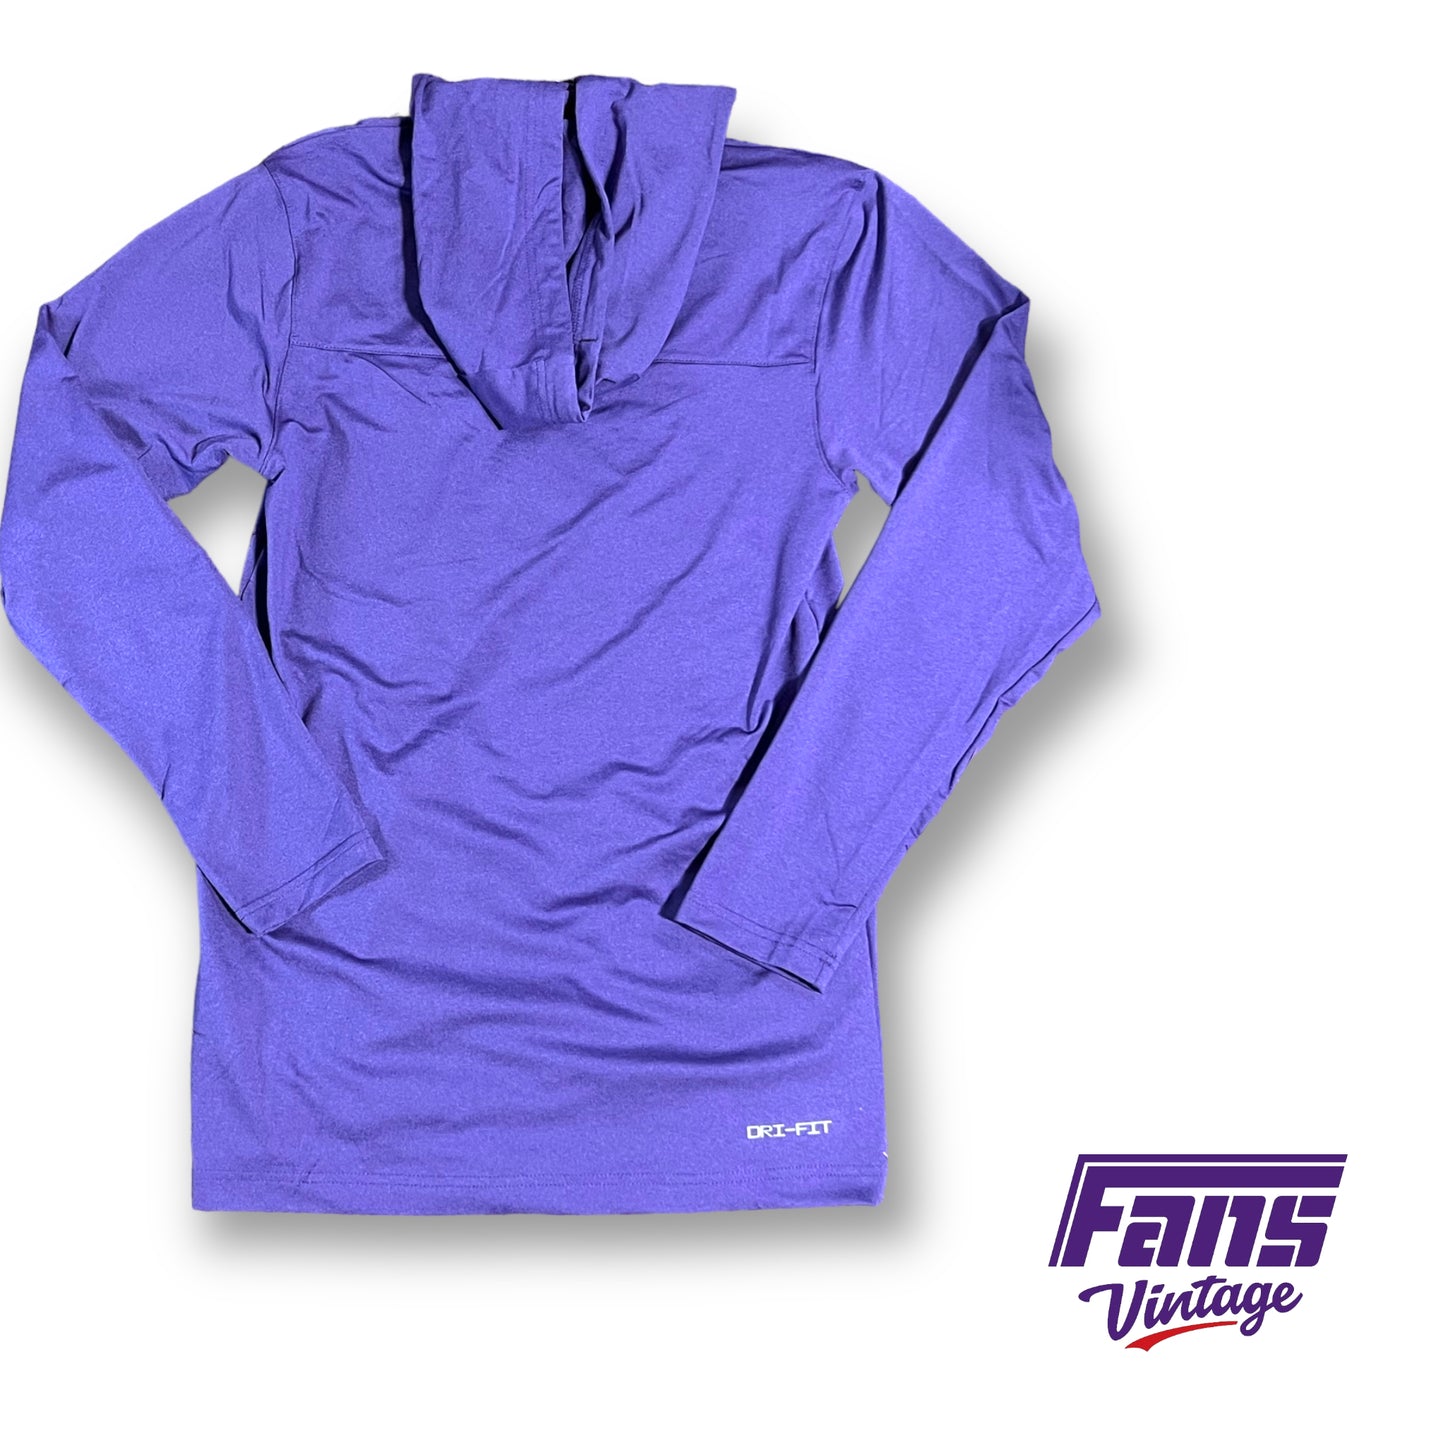 Special Edition Nike TCU team issued long sleeve hooded pullover